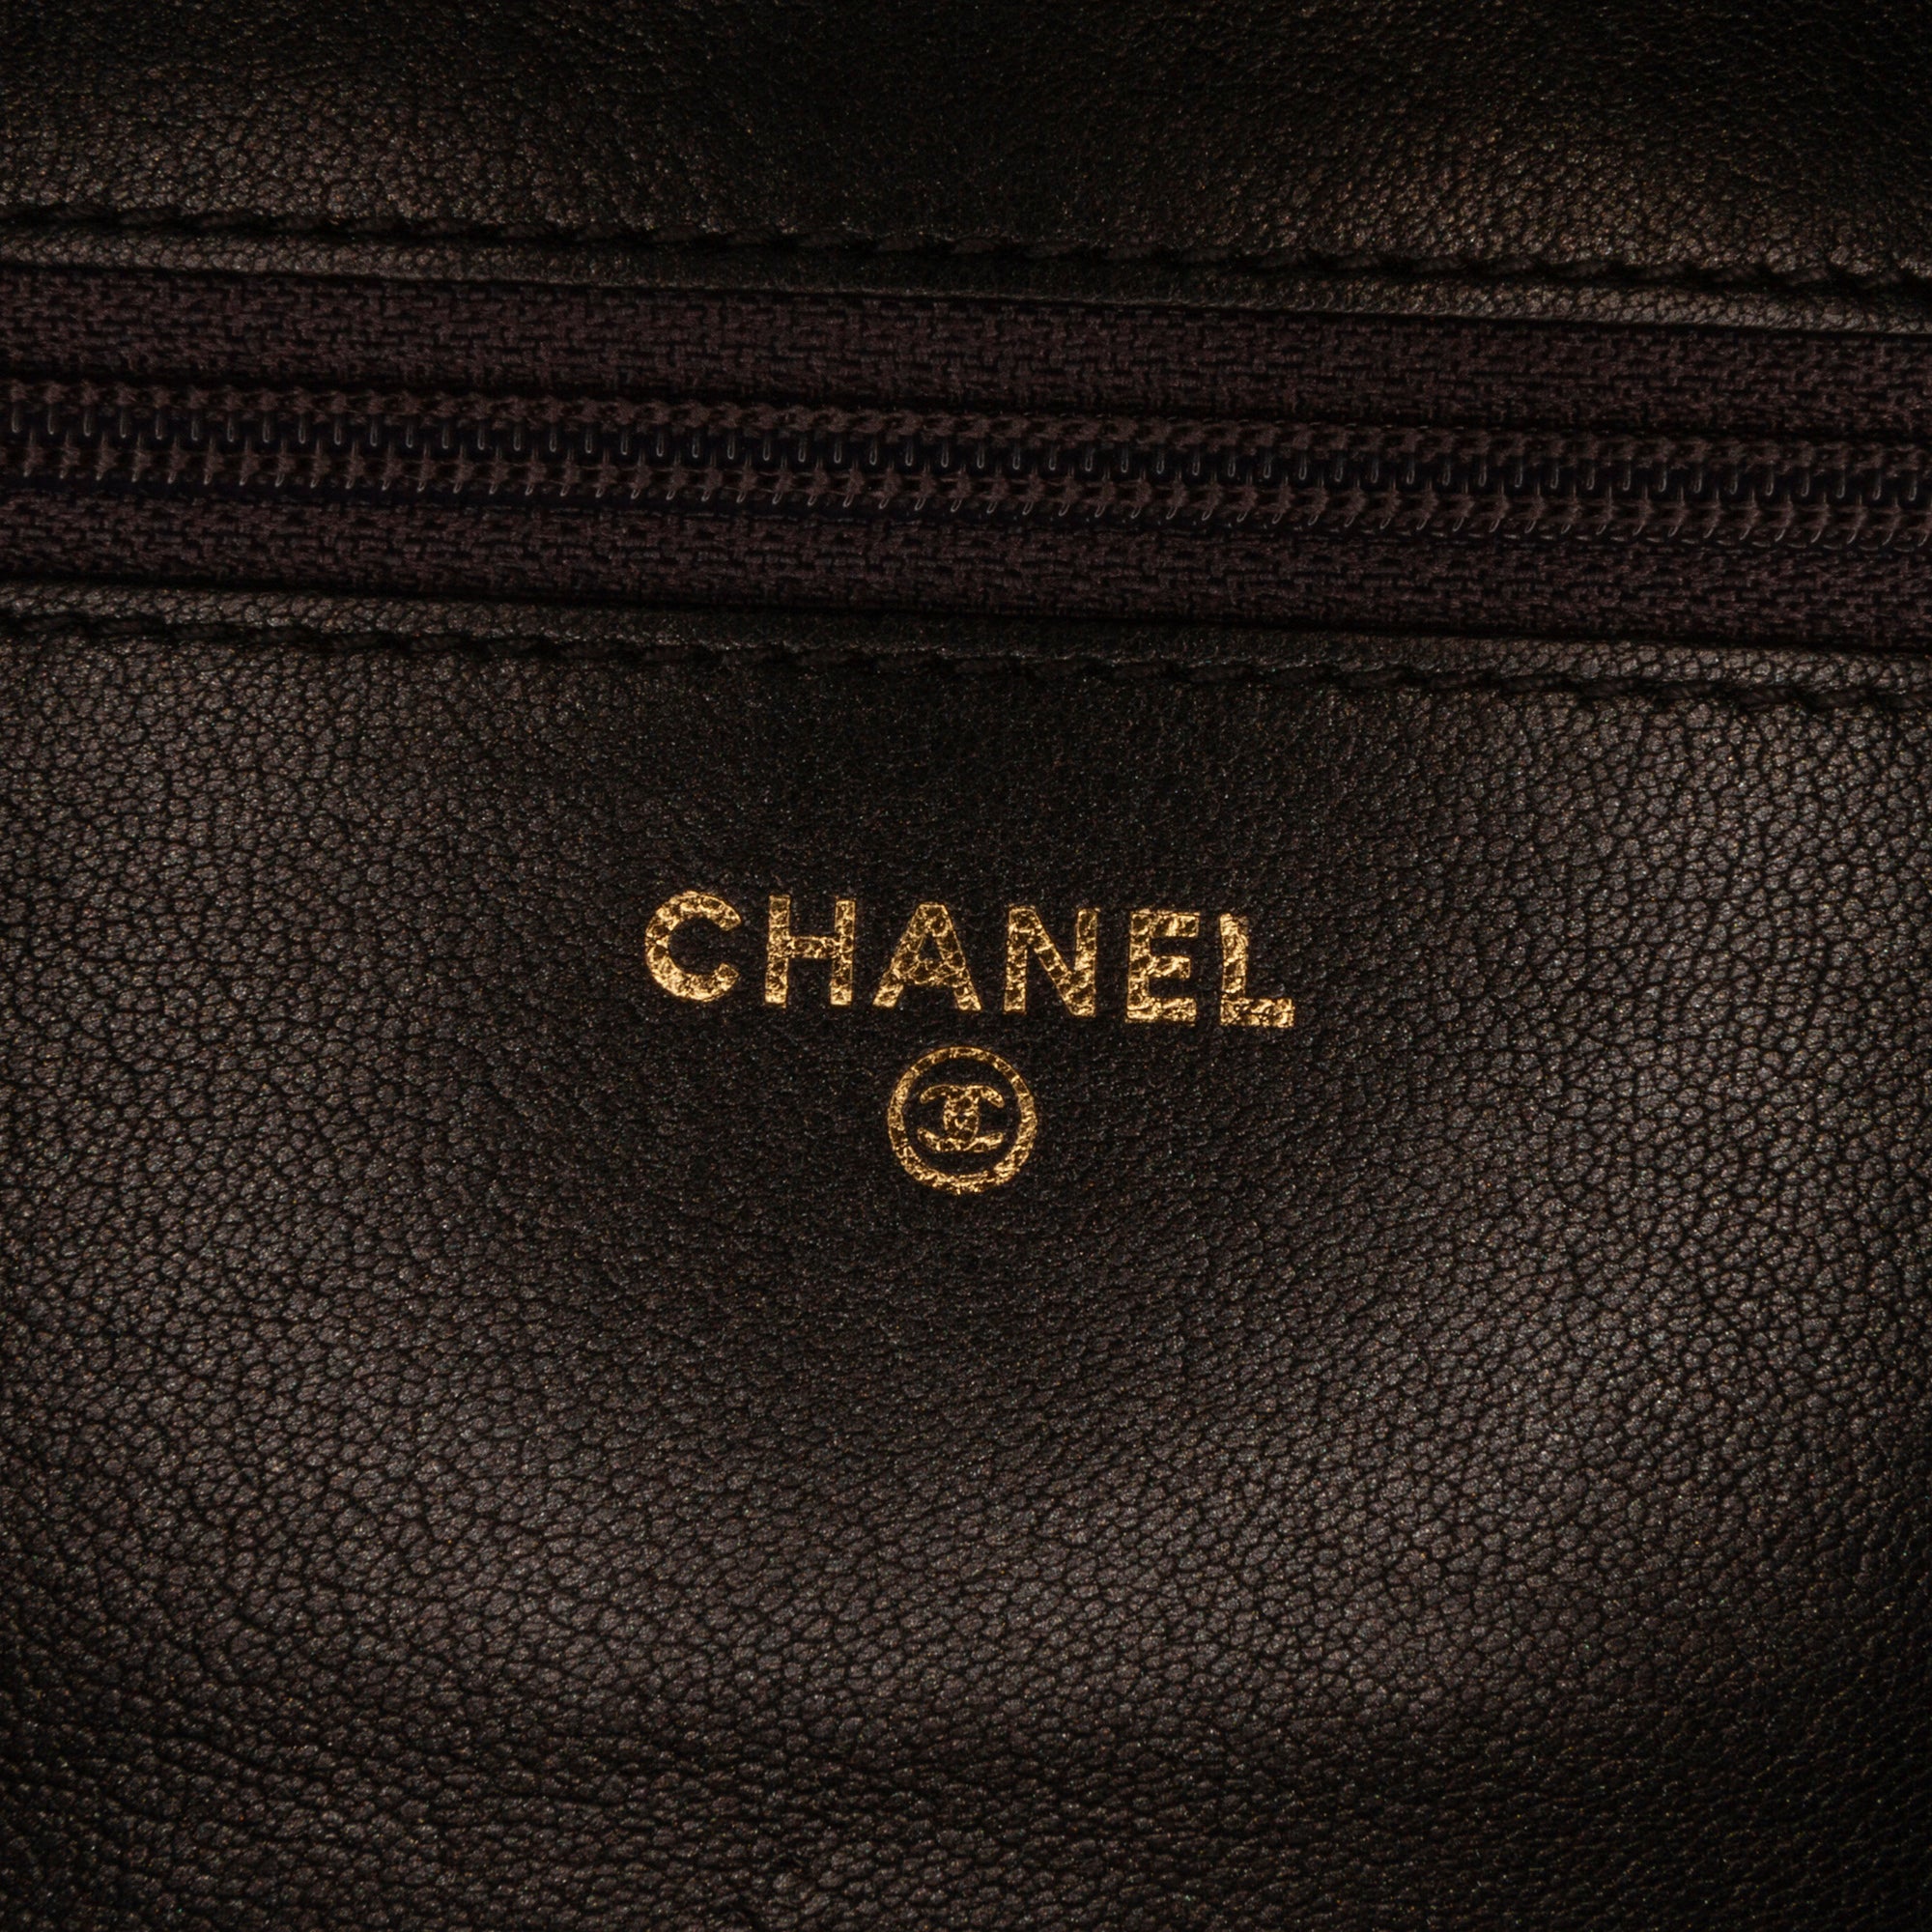 chanel pre owned 1995 1997 large diamond quilted flap crossbody bag item, Cra-wallonieShops Revival